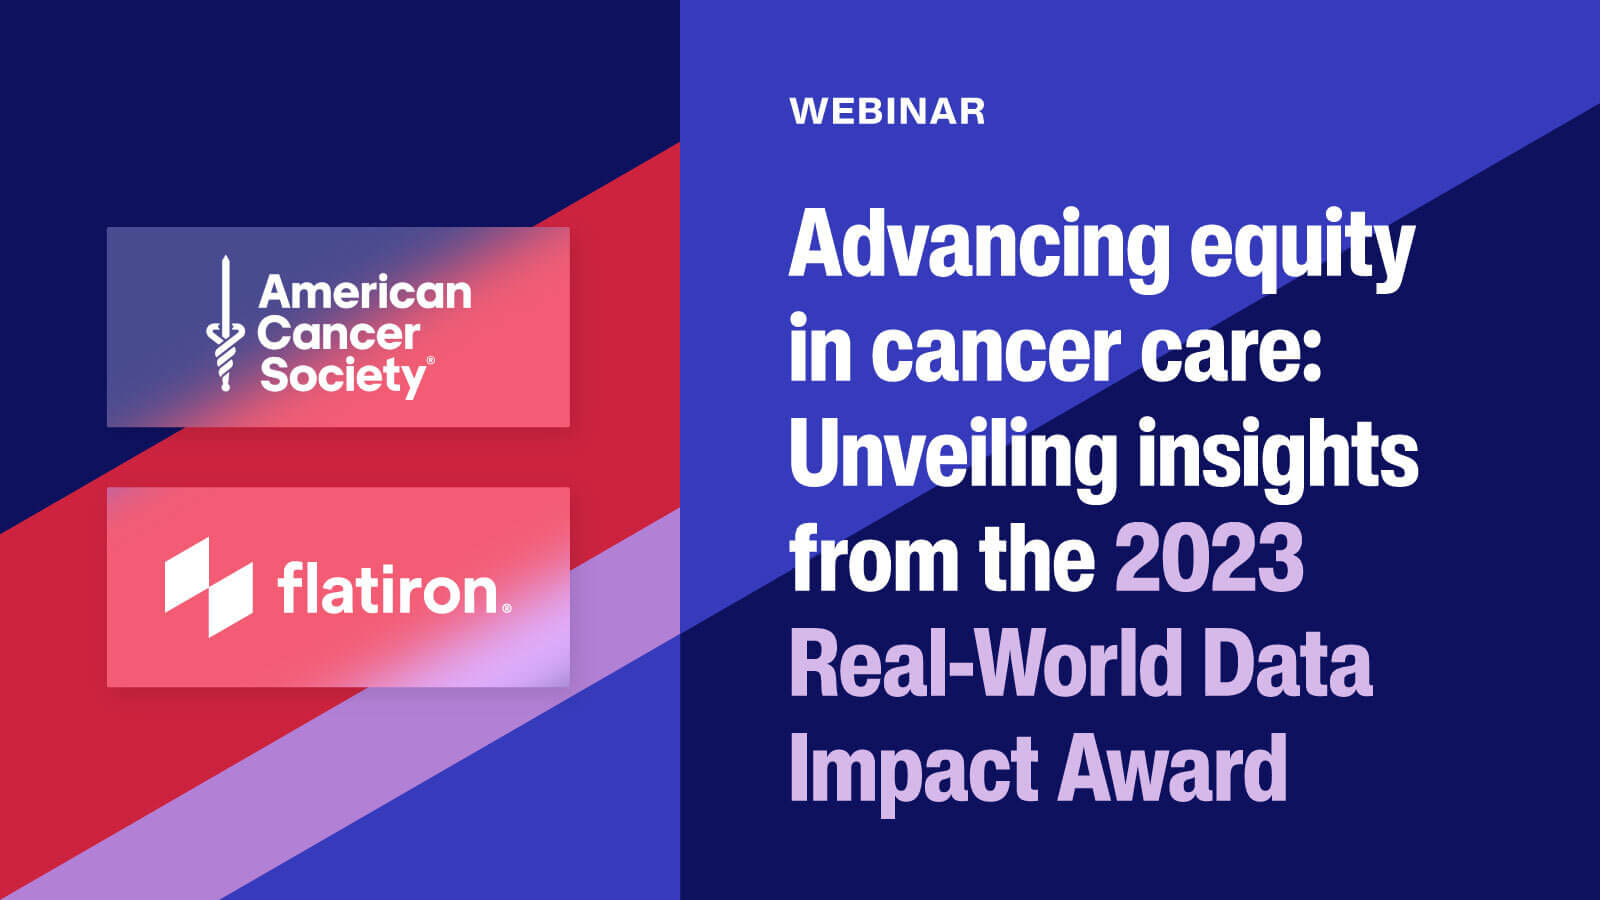 Advancing equity in cancer care: Unveiling insights from the 2023 Real-World Data Impact Award